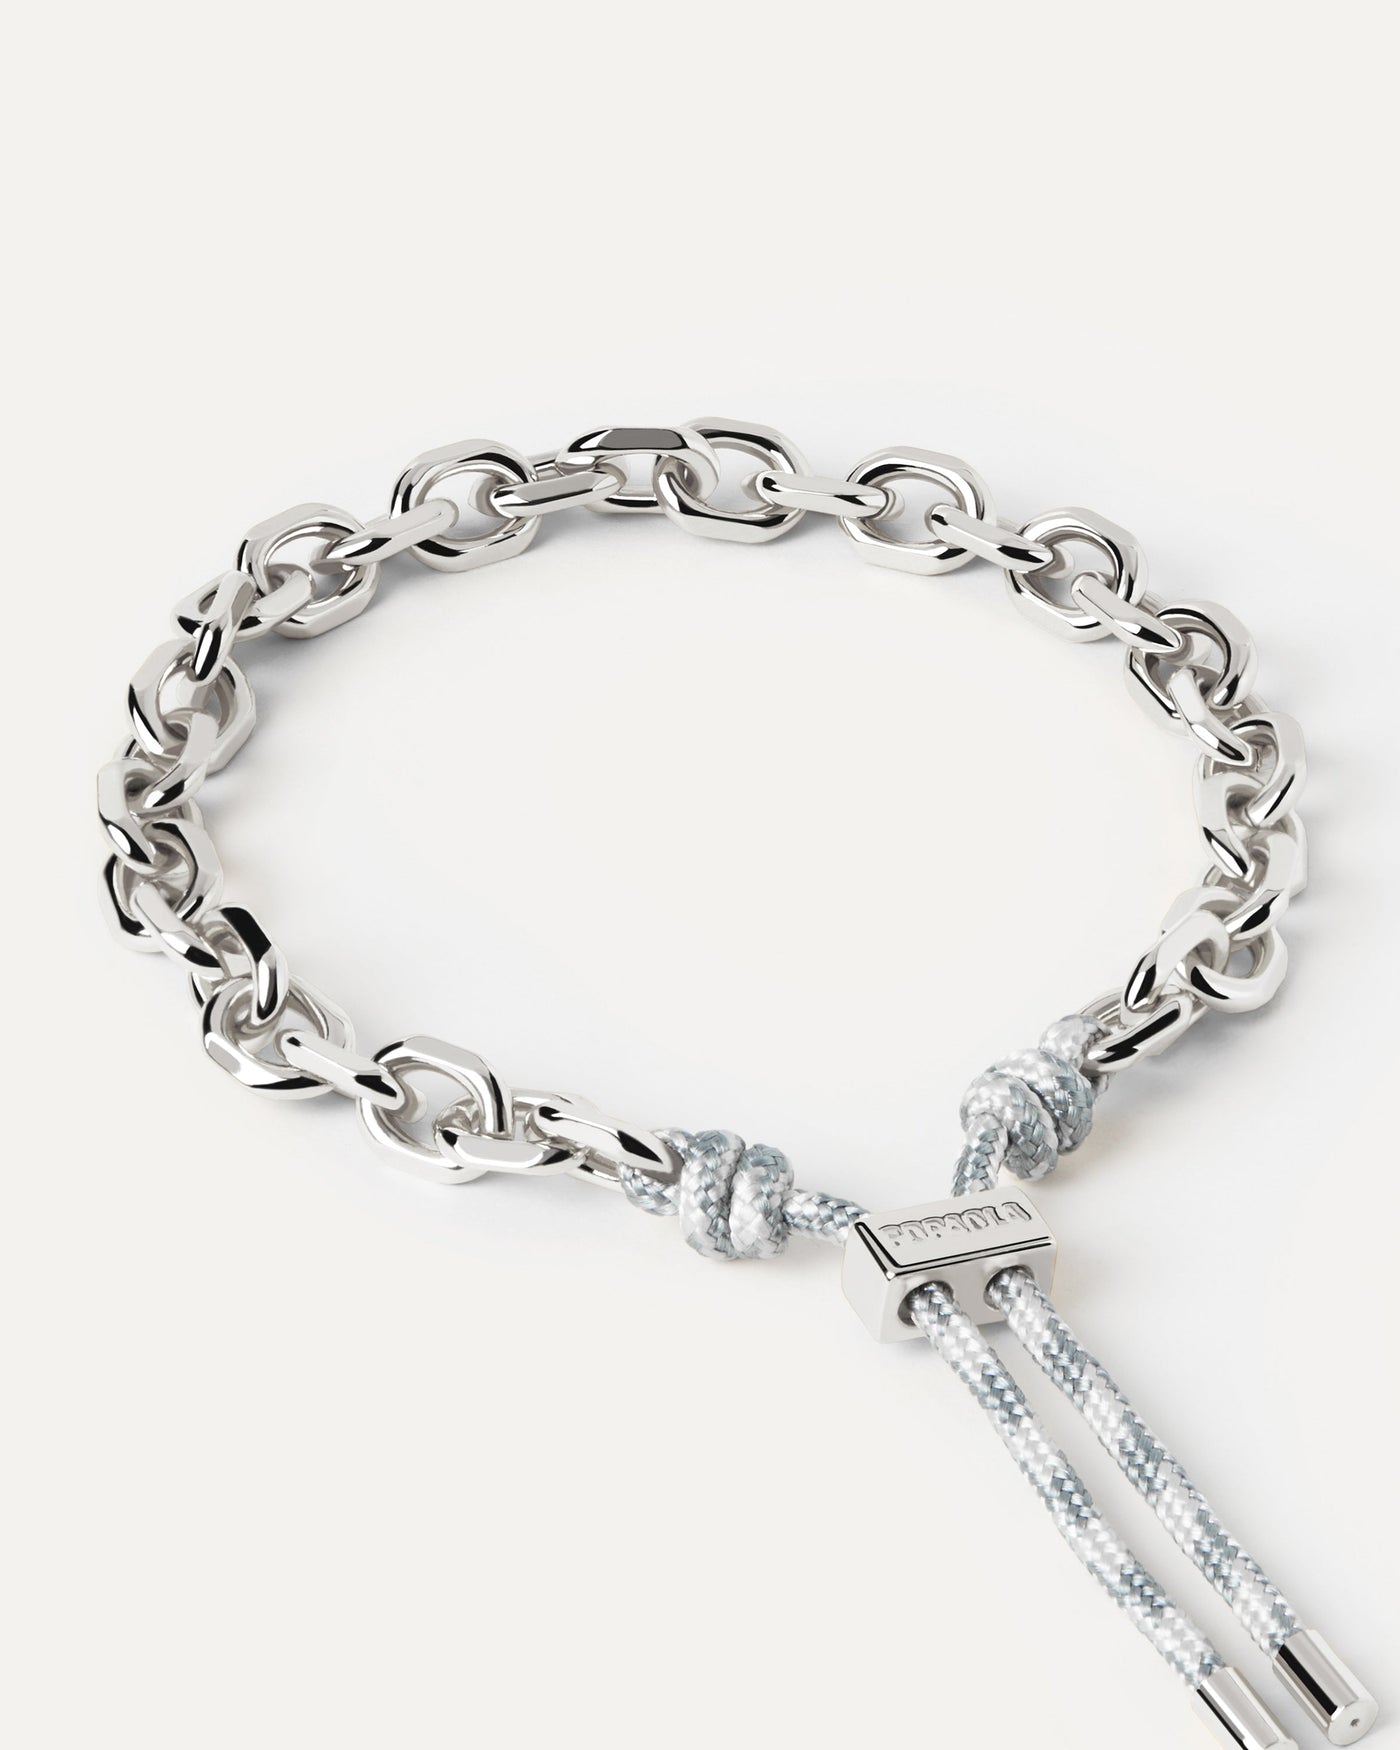 2023 Selection | Sky Essential Rope and Chain Silver Bracelet. Silver chain bracelet with a forest green rope adjustable sliding clasp. Get the latest arrival from PDPAOLA. Place your order safely and get this Best Seller. Free Shipping.